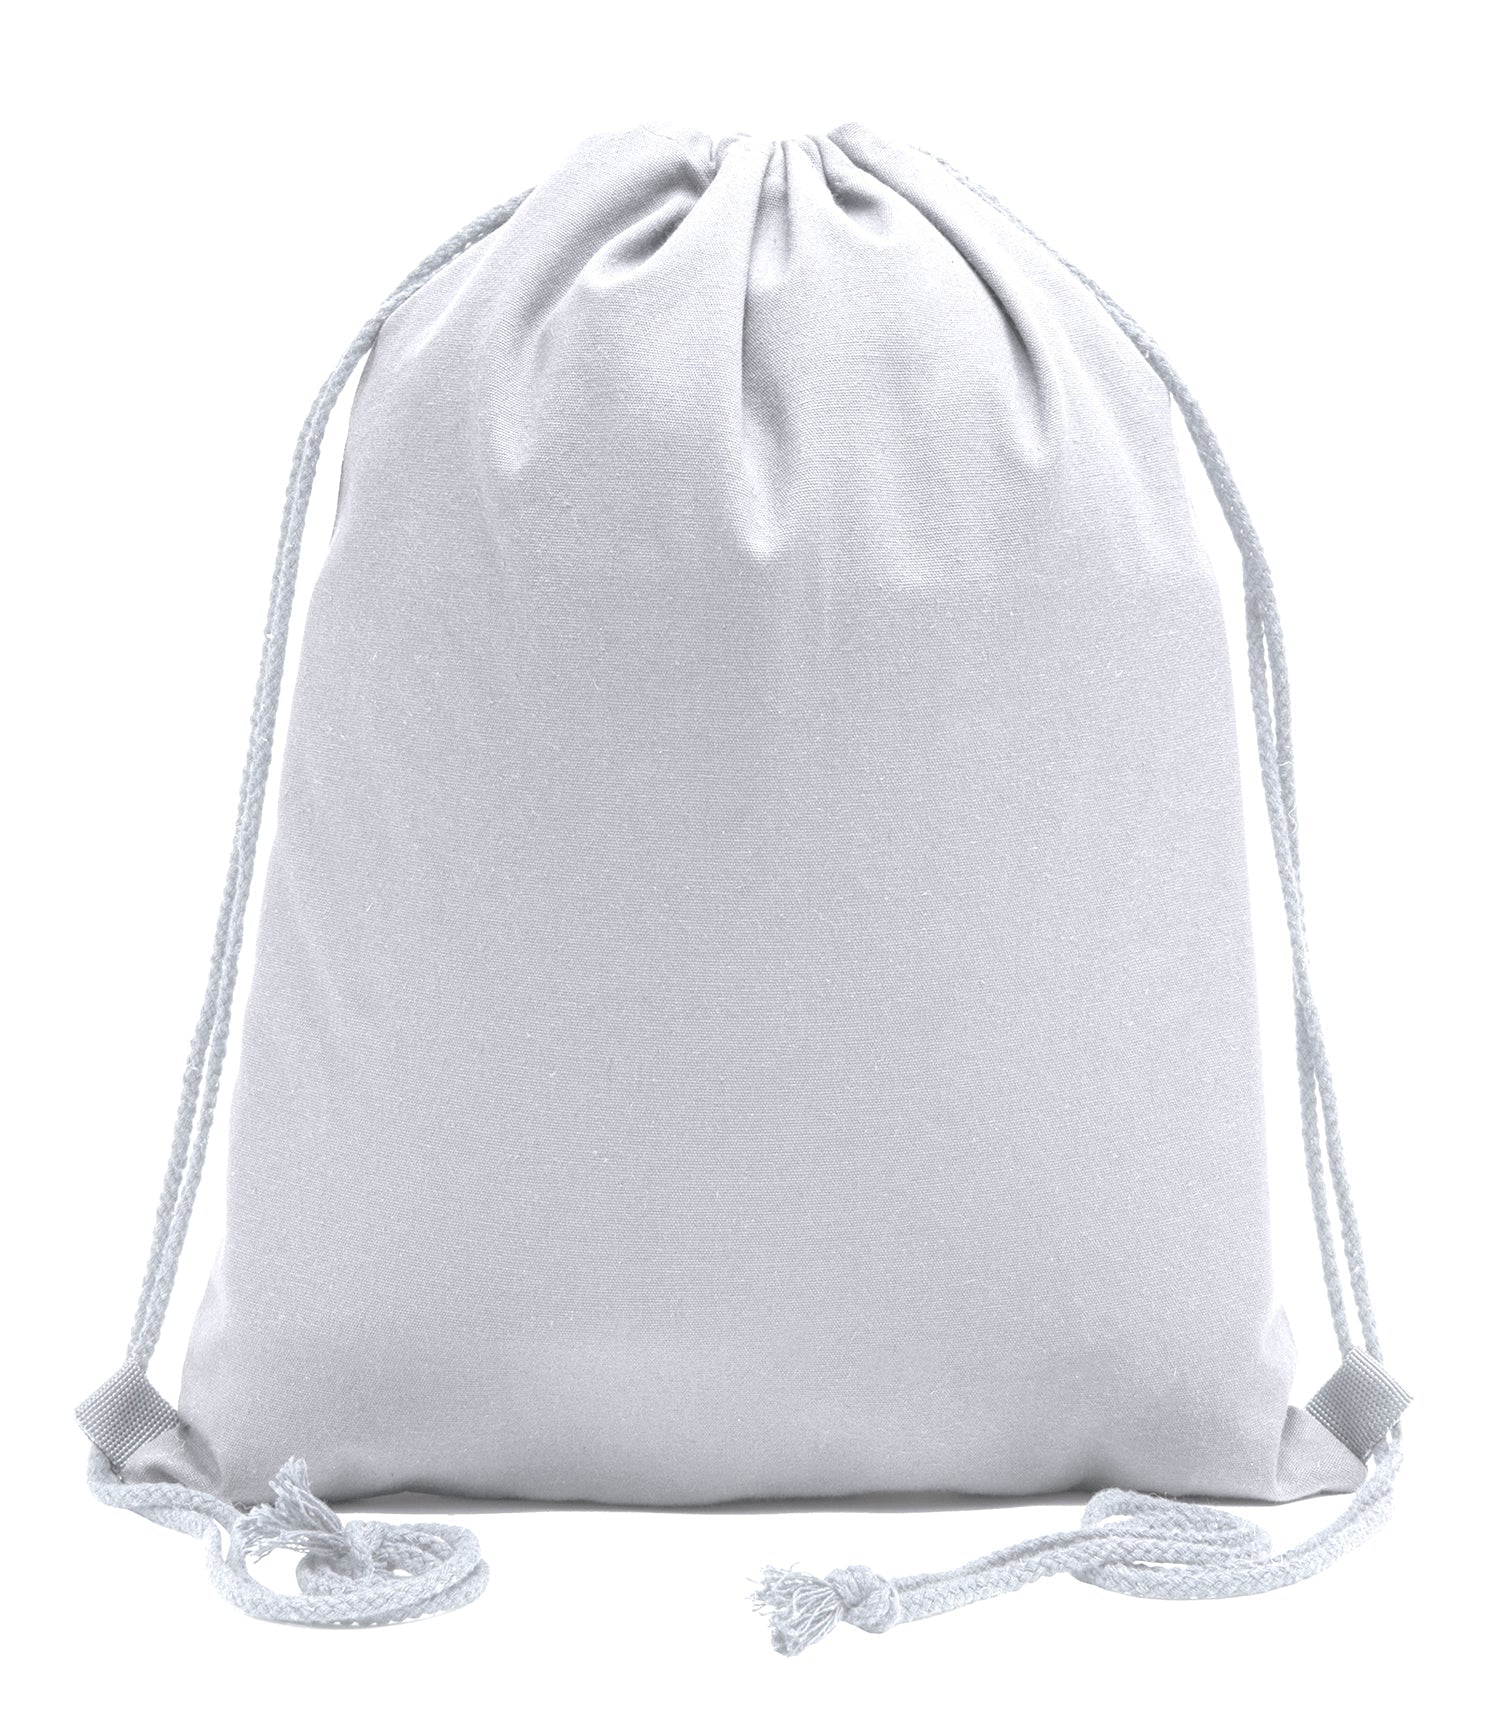 Wholesale 100 % Cotton Drawstring Bags Trade Suppliers